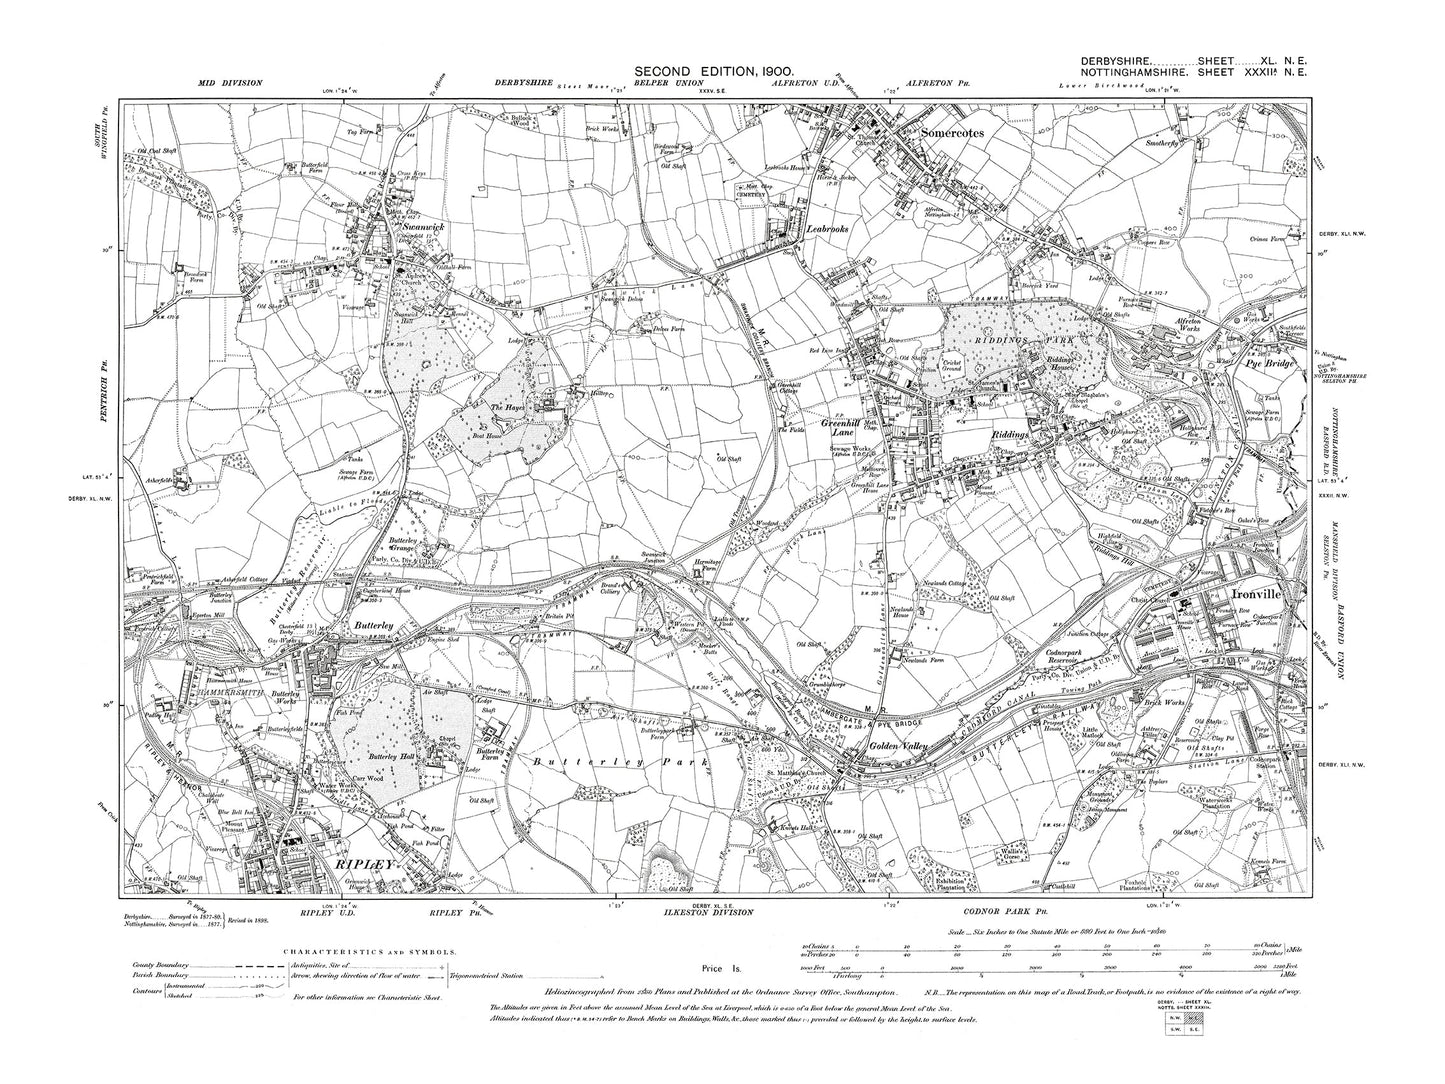 Old OS map dated 1900, showing Somercotes, Riddings Ironville in Derbyshire 40NE